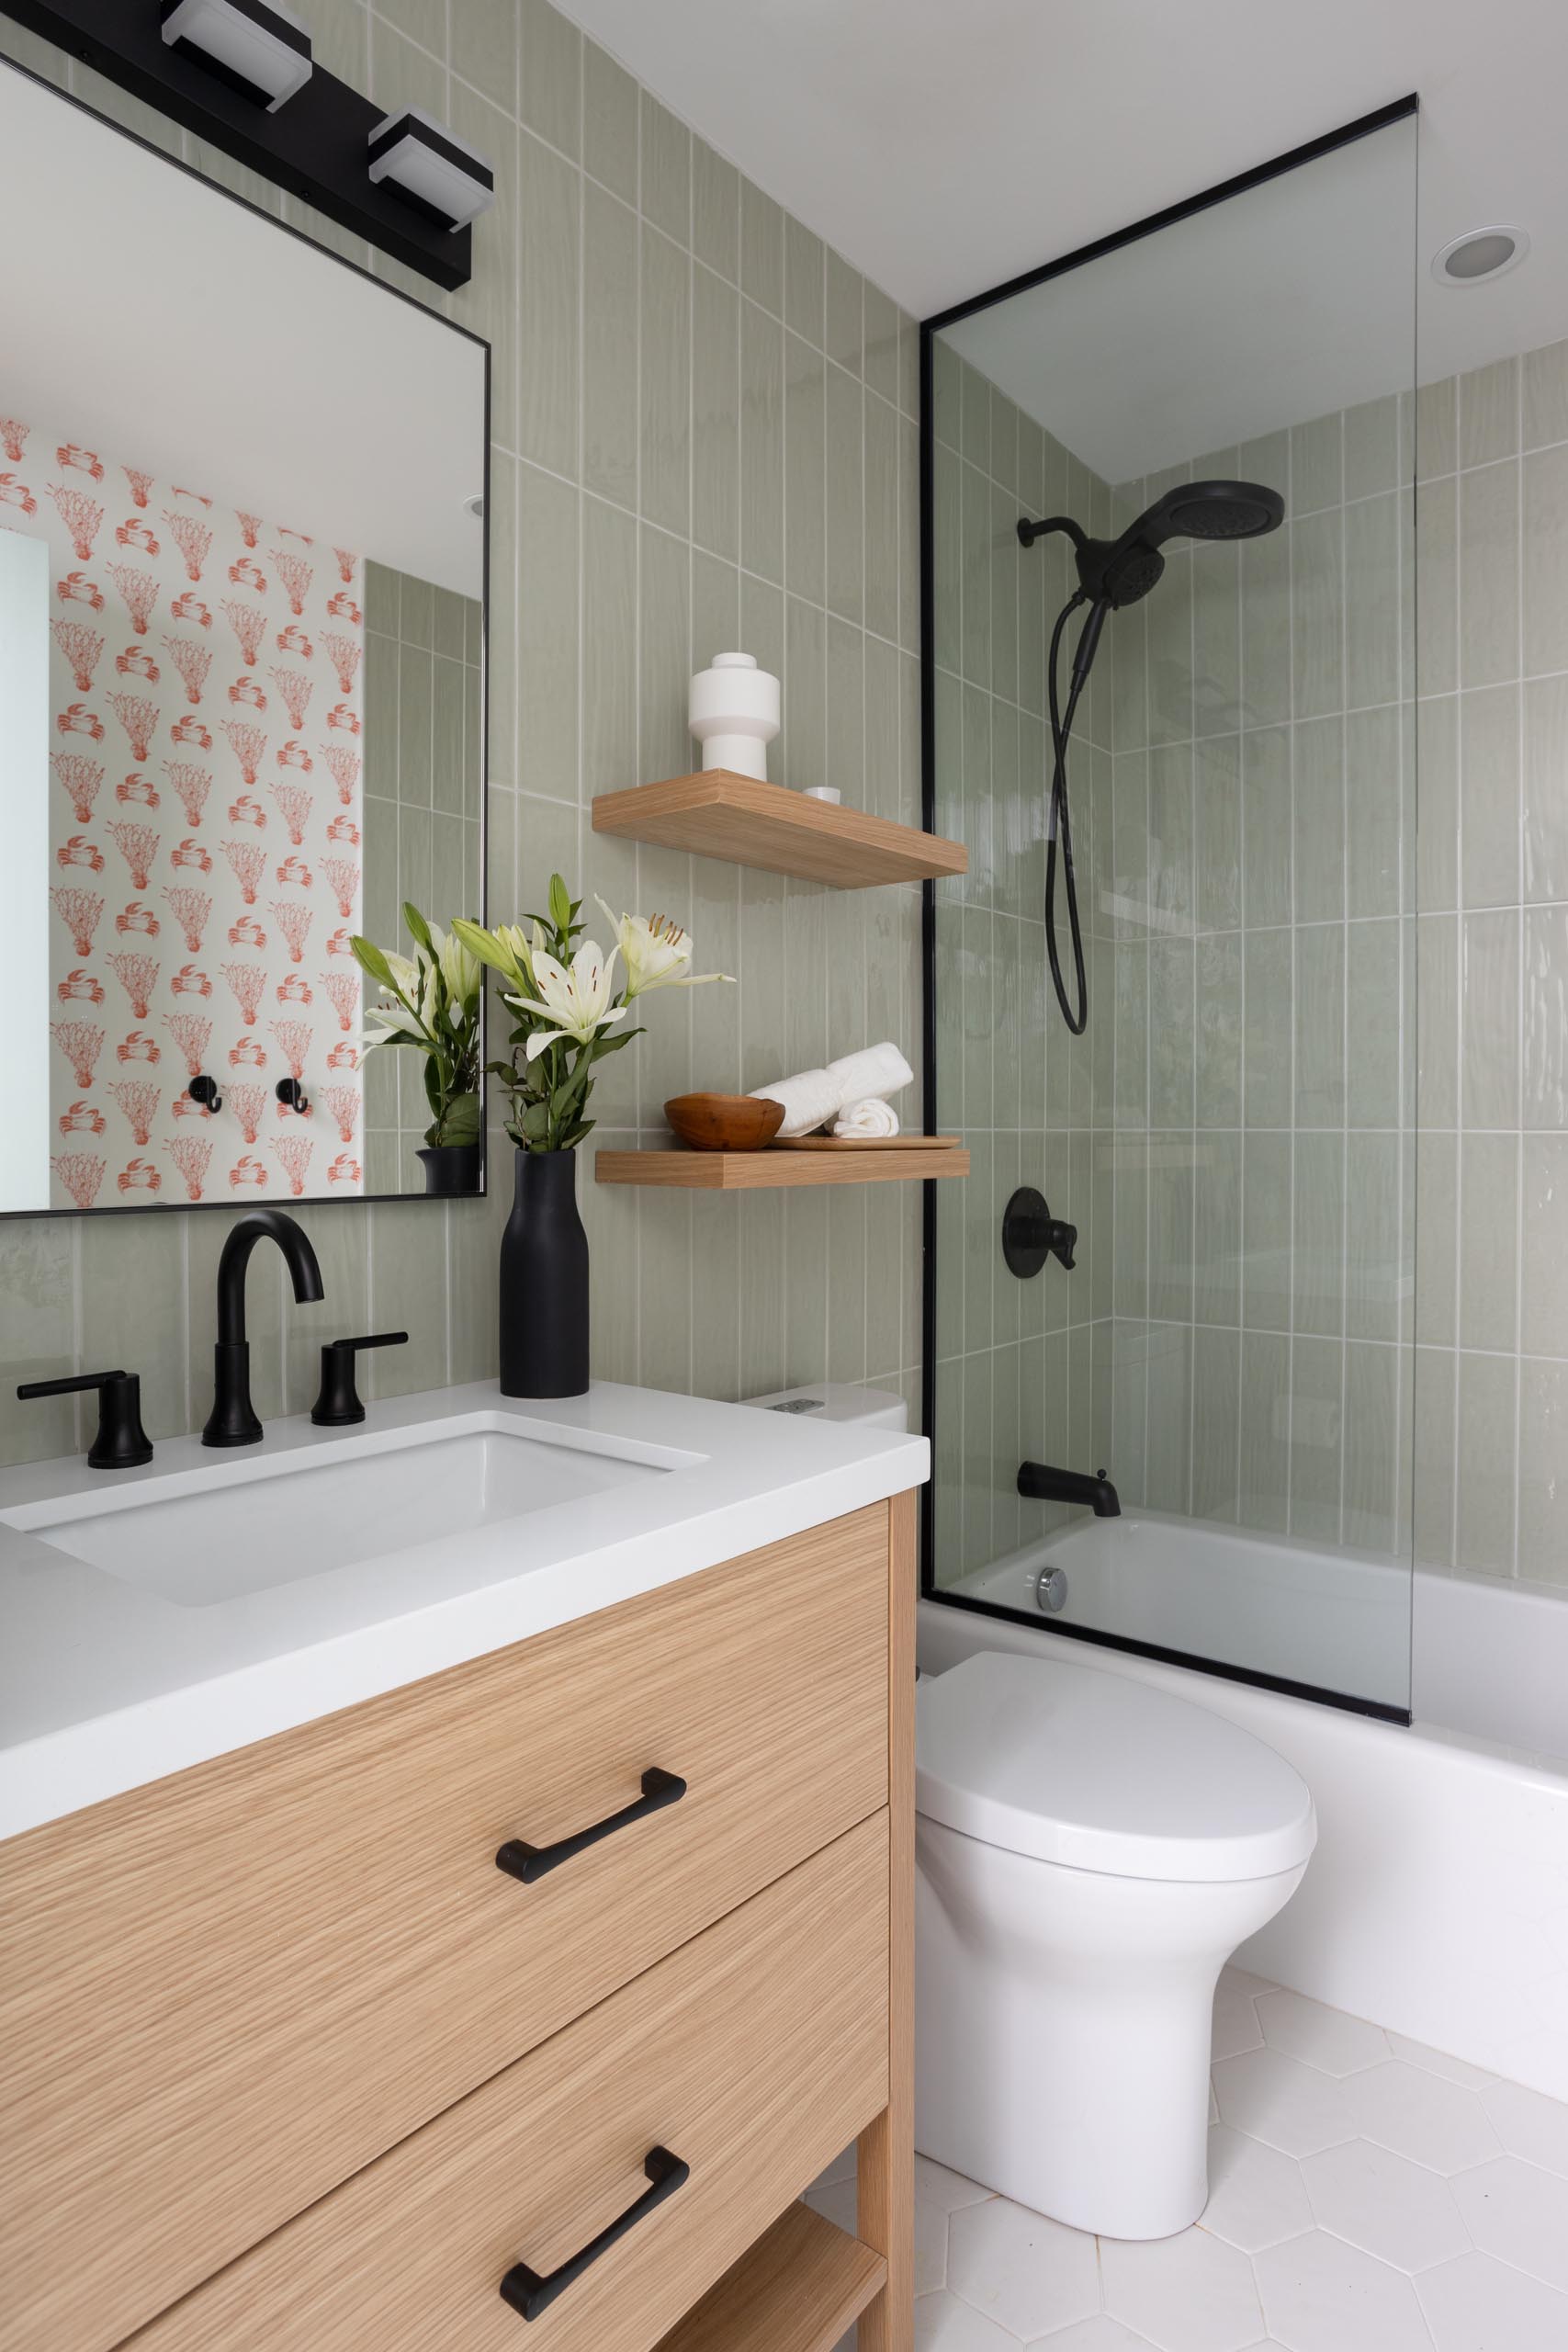 In this bathroom there's black accents and light green tiles that cover the walls, while a wallpaper with a crustacean and coral print adds a quirky colorful touch.